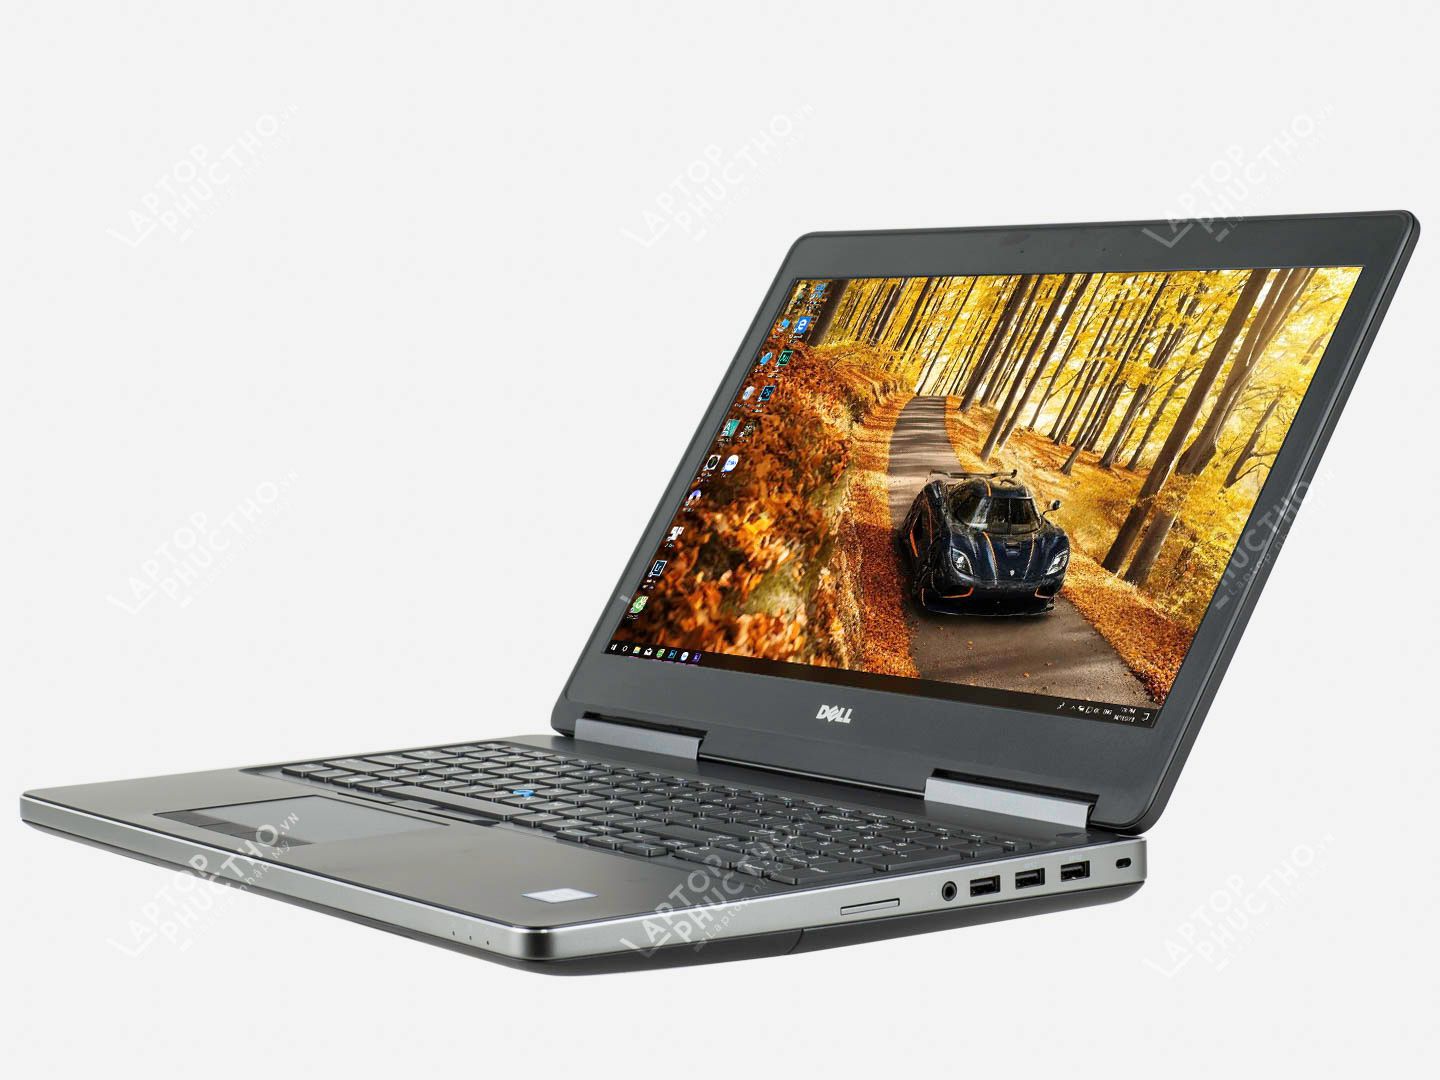 Dell 7510, Dell Precisio 7510, Laptop Cũ Dell, Laptop Đồ Họa, Laptop –  Laptop Phúc Thọ - Cung Cấp Laptop Lenovo Thinkpad - Dell - Hp - Asus - Acer